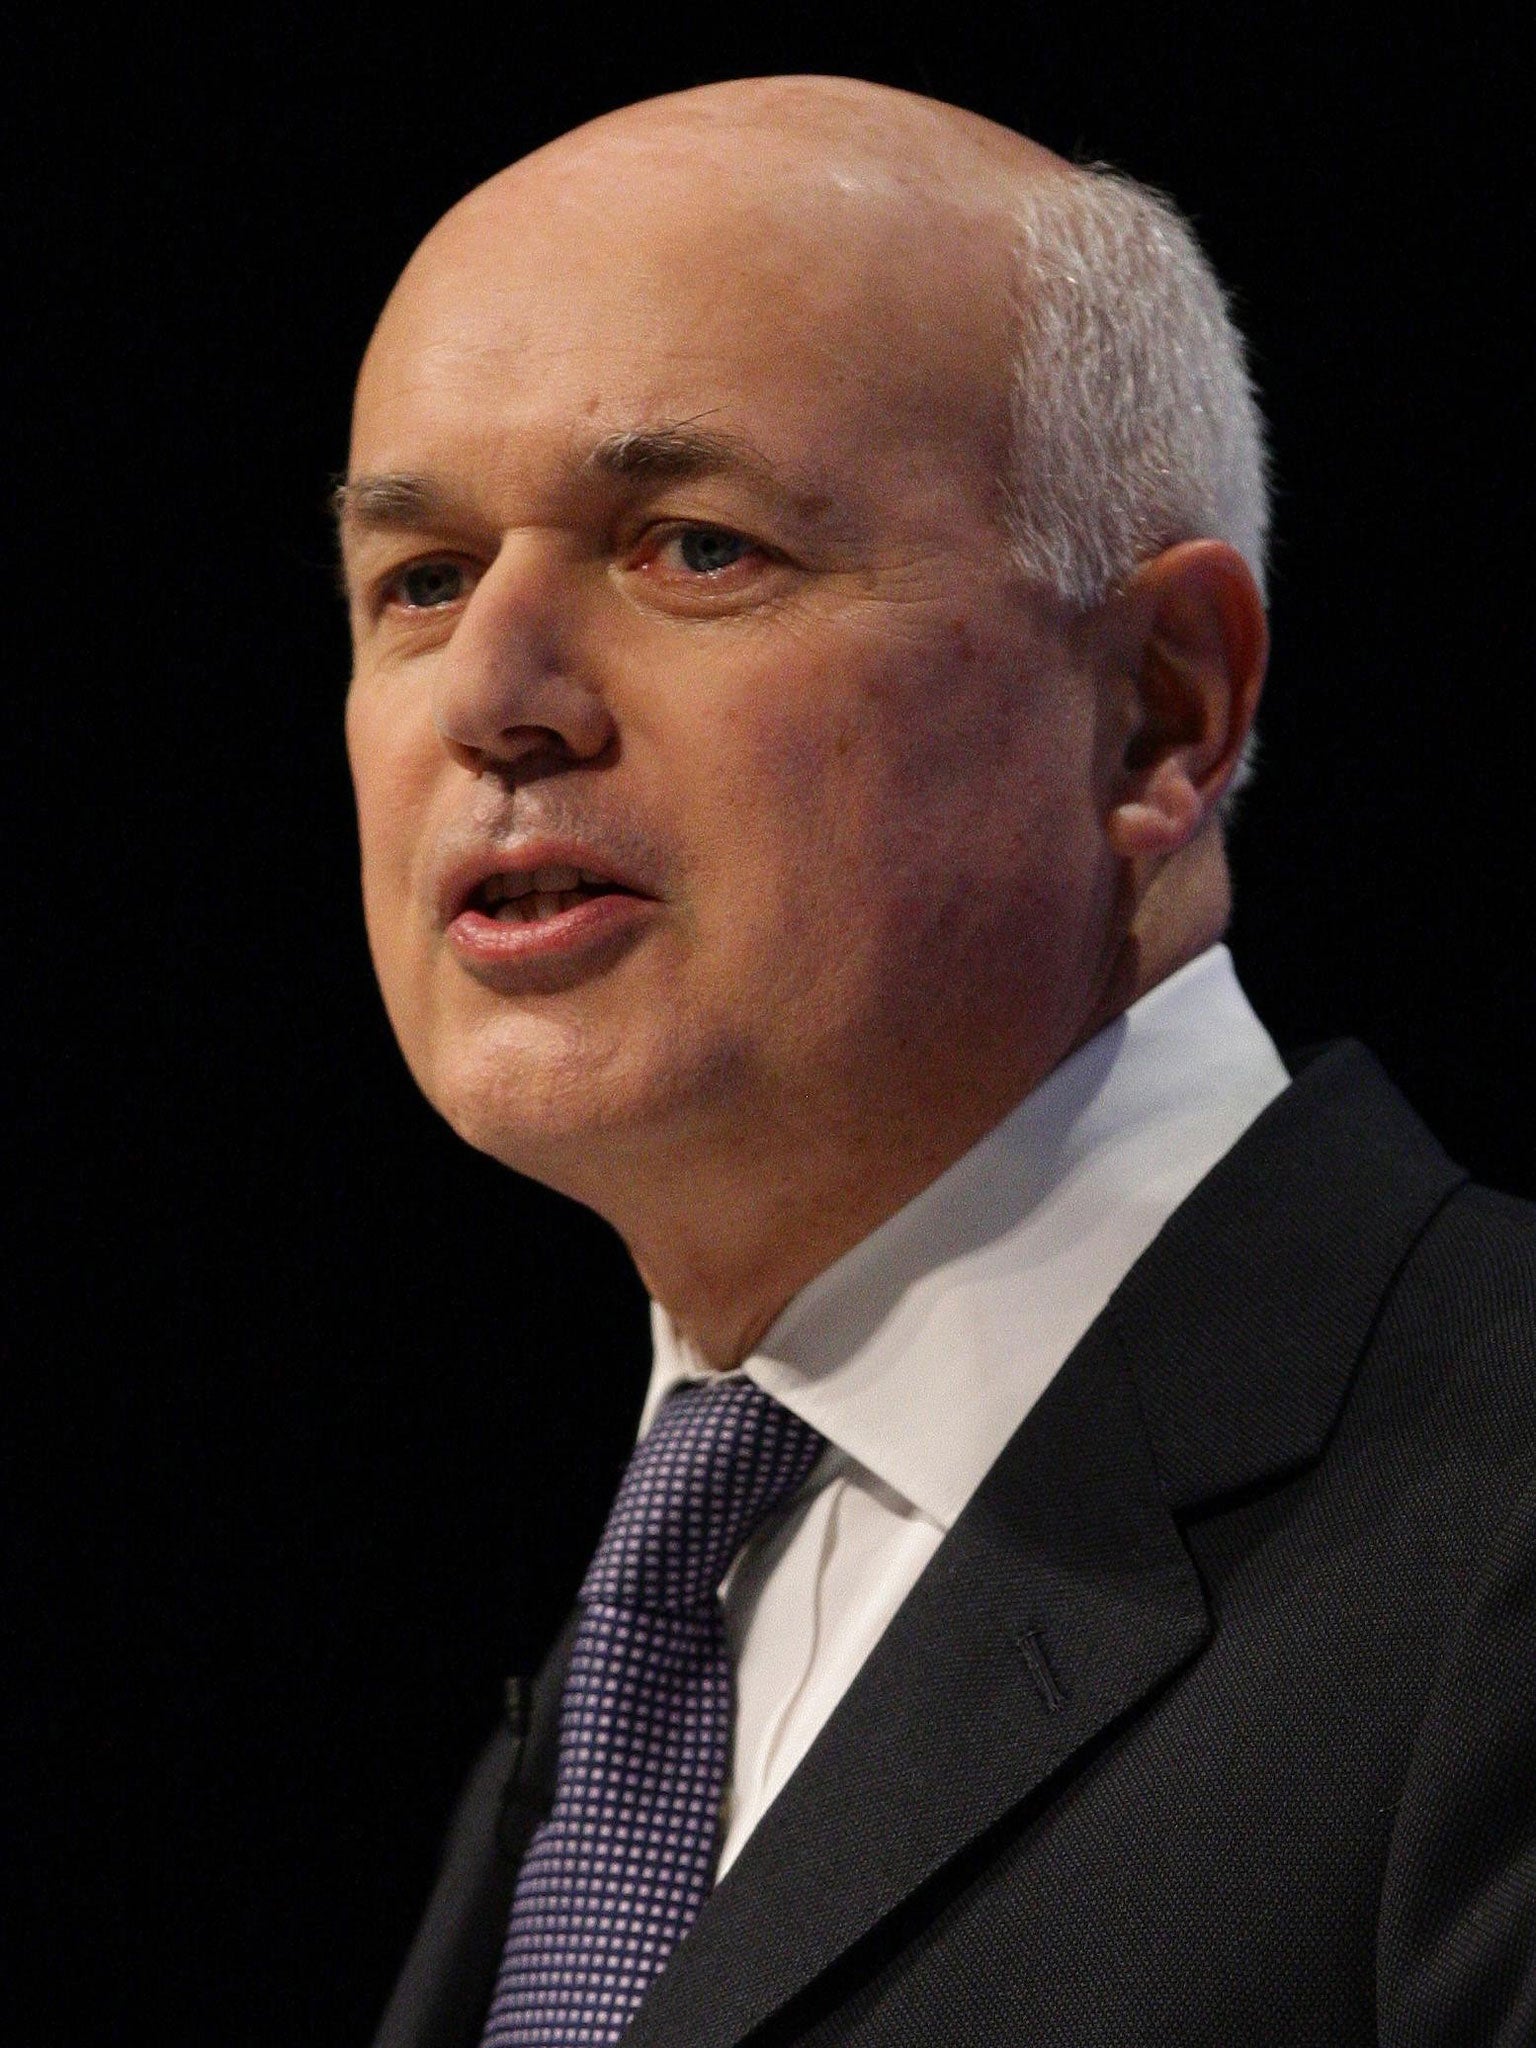 Work and Pensions Secretary Iain Duncan Smith has been accused of attempting to hide the bad news by announcing it at the same time as the Autumn Statement